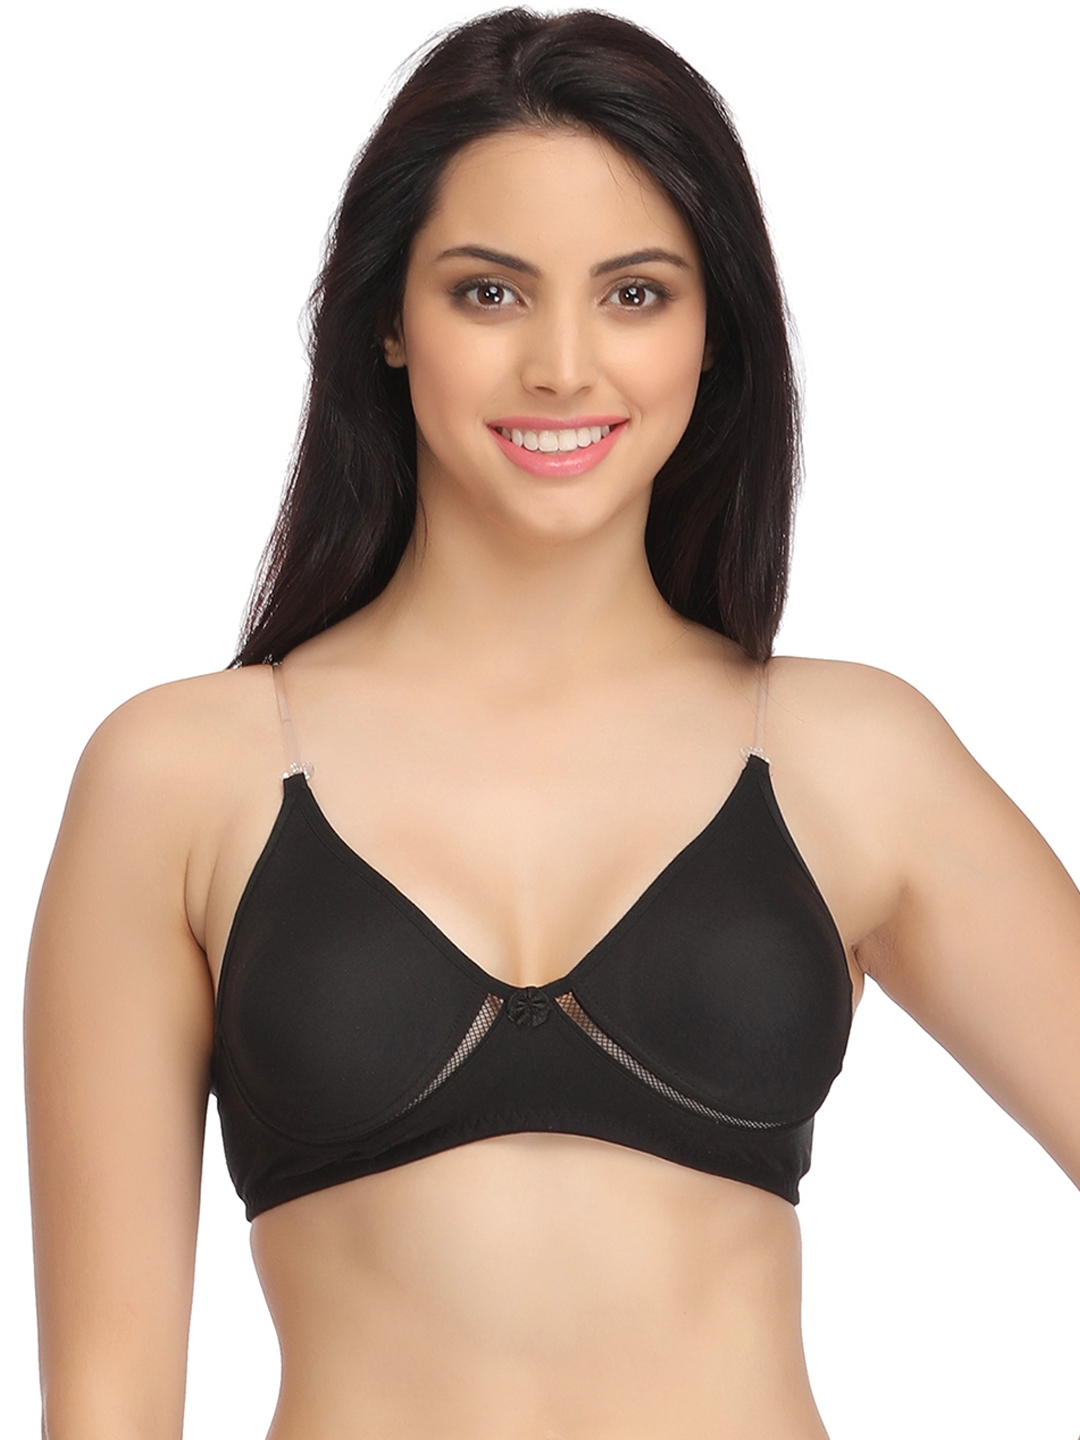 Buy Clovia Cotton Padded Non-Wired Plunge Bra with Detachable